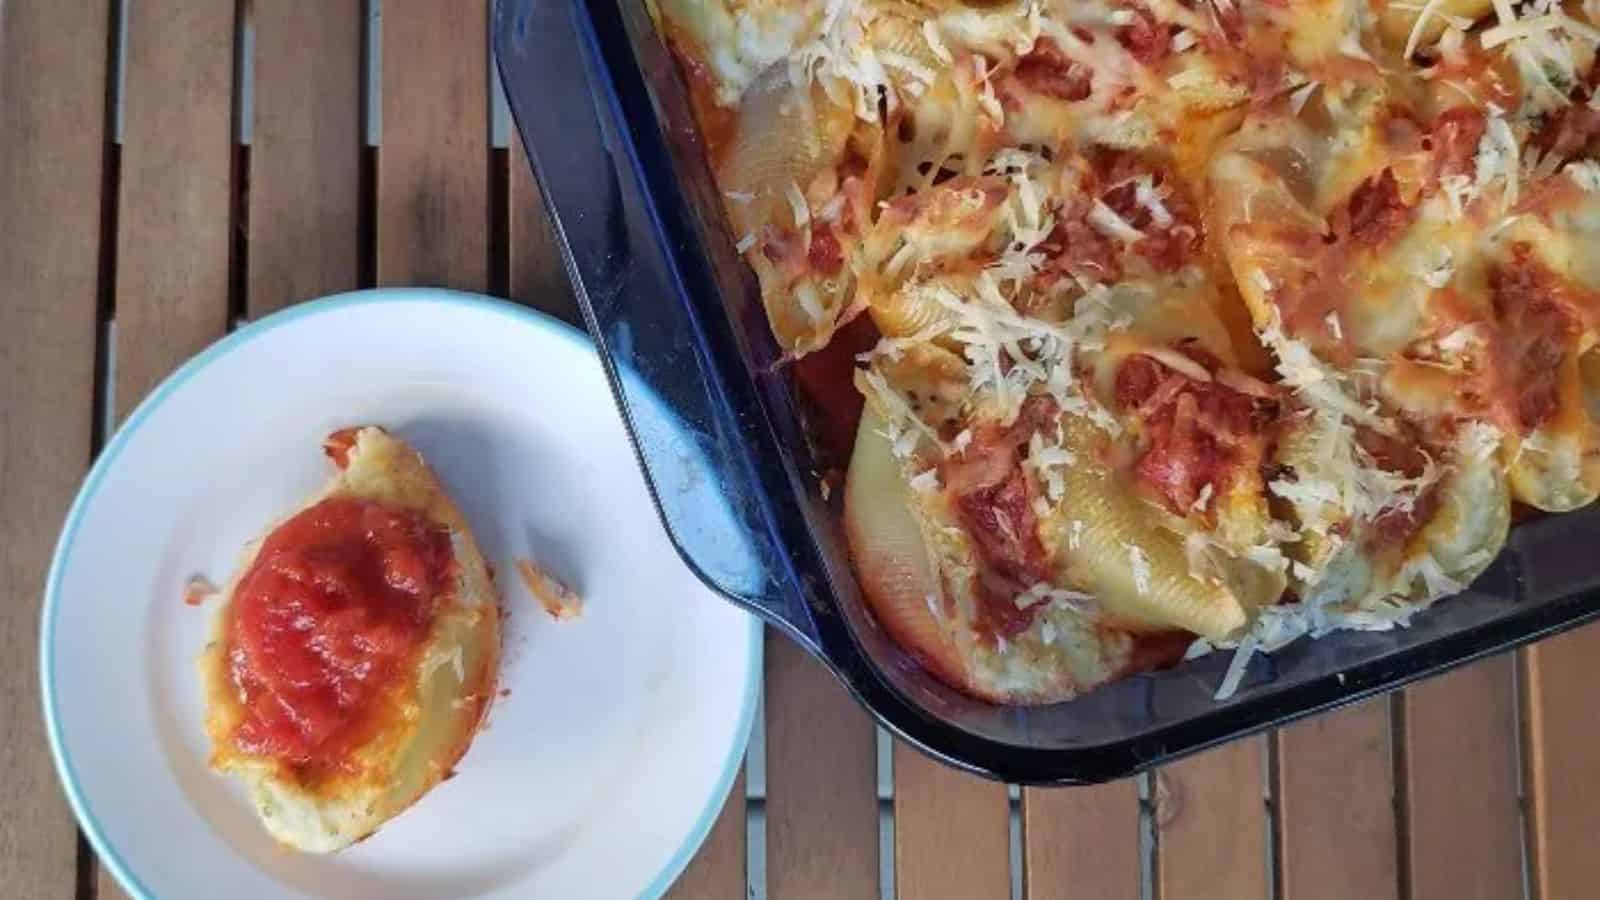 Image shows an overhead shot of Easy Cheesy Stuffed Shells with a small plate holding one and the rest of the pan next to it.